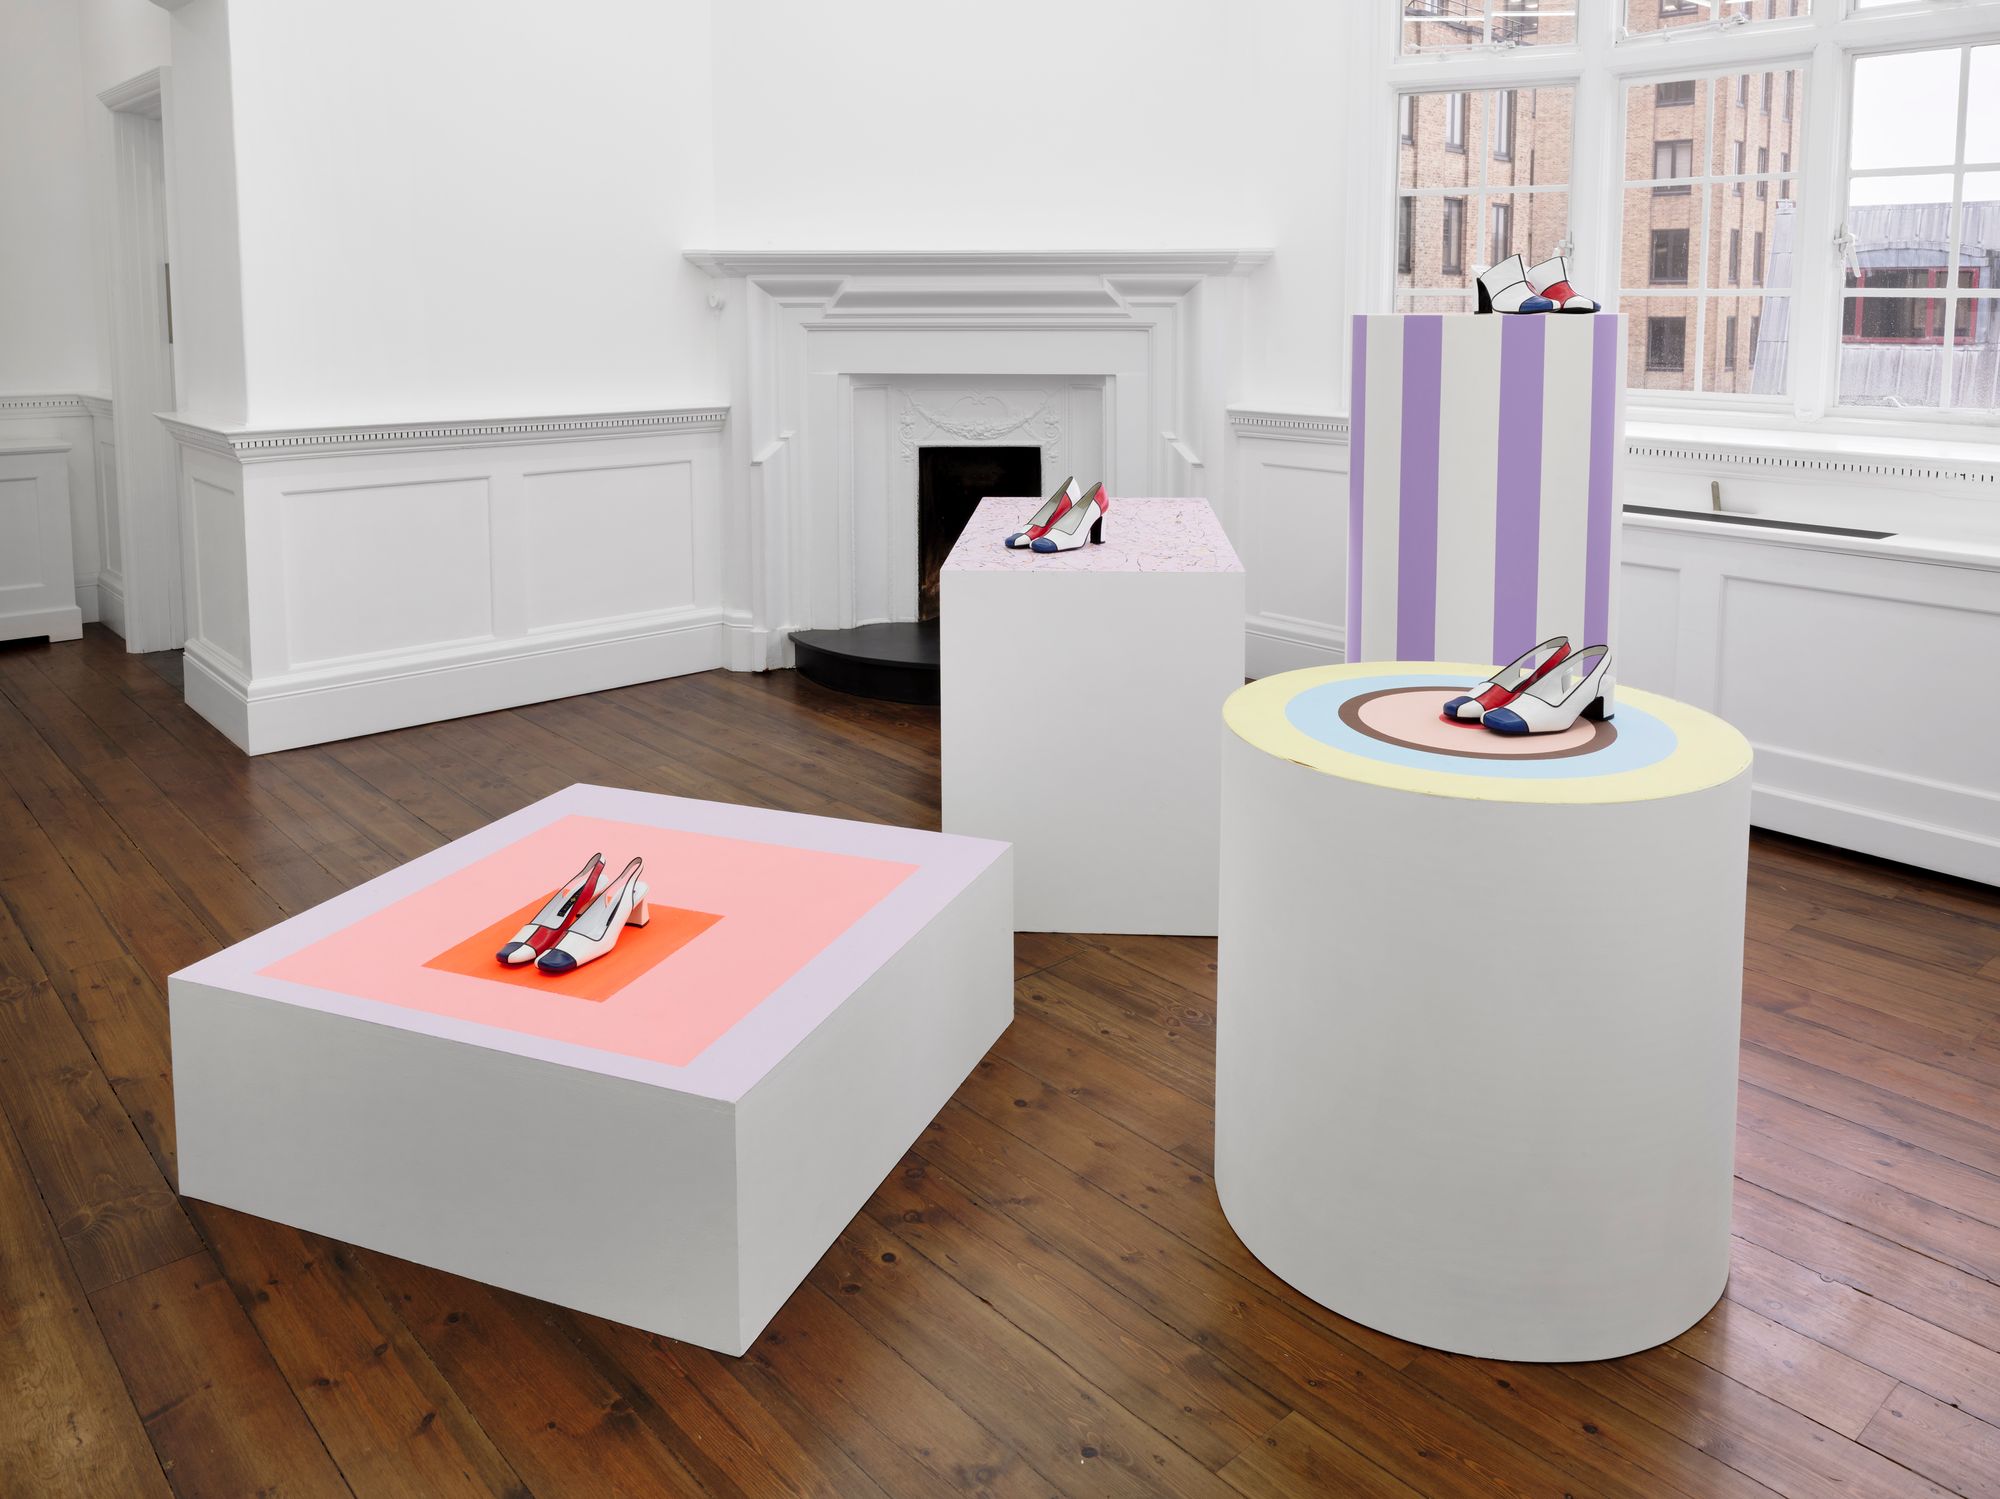 Sylvie Fleury's Exhibition Showcases Makeup-Inspired Installations – WWD